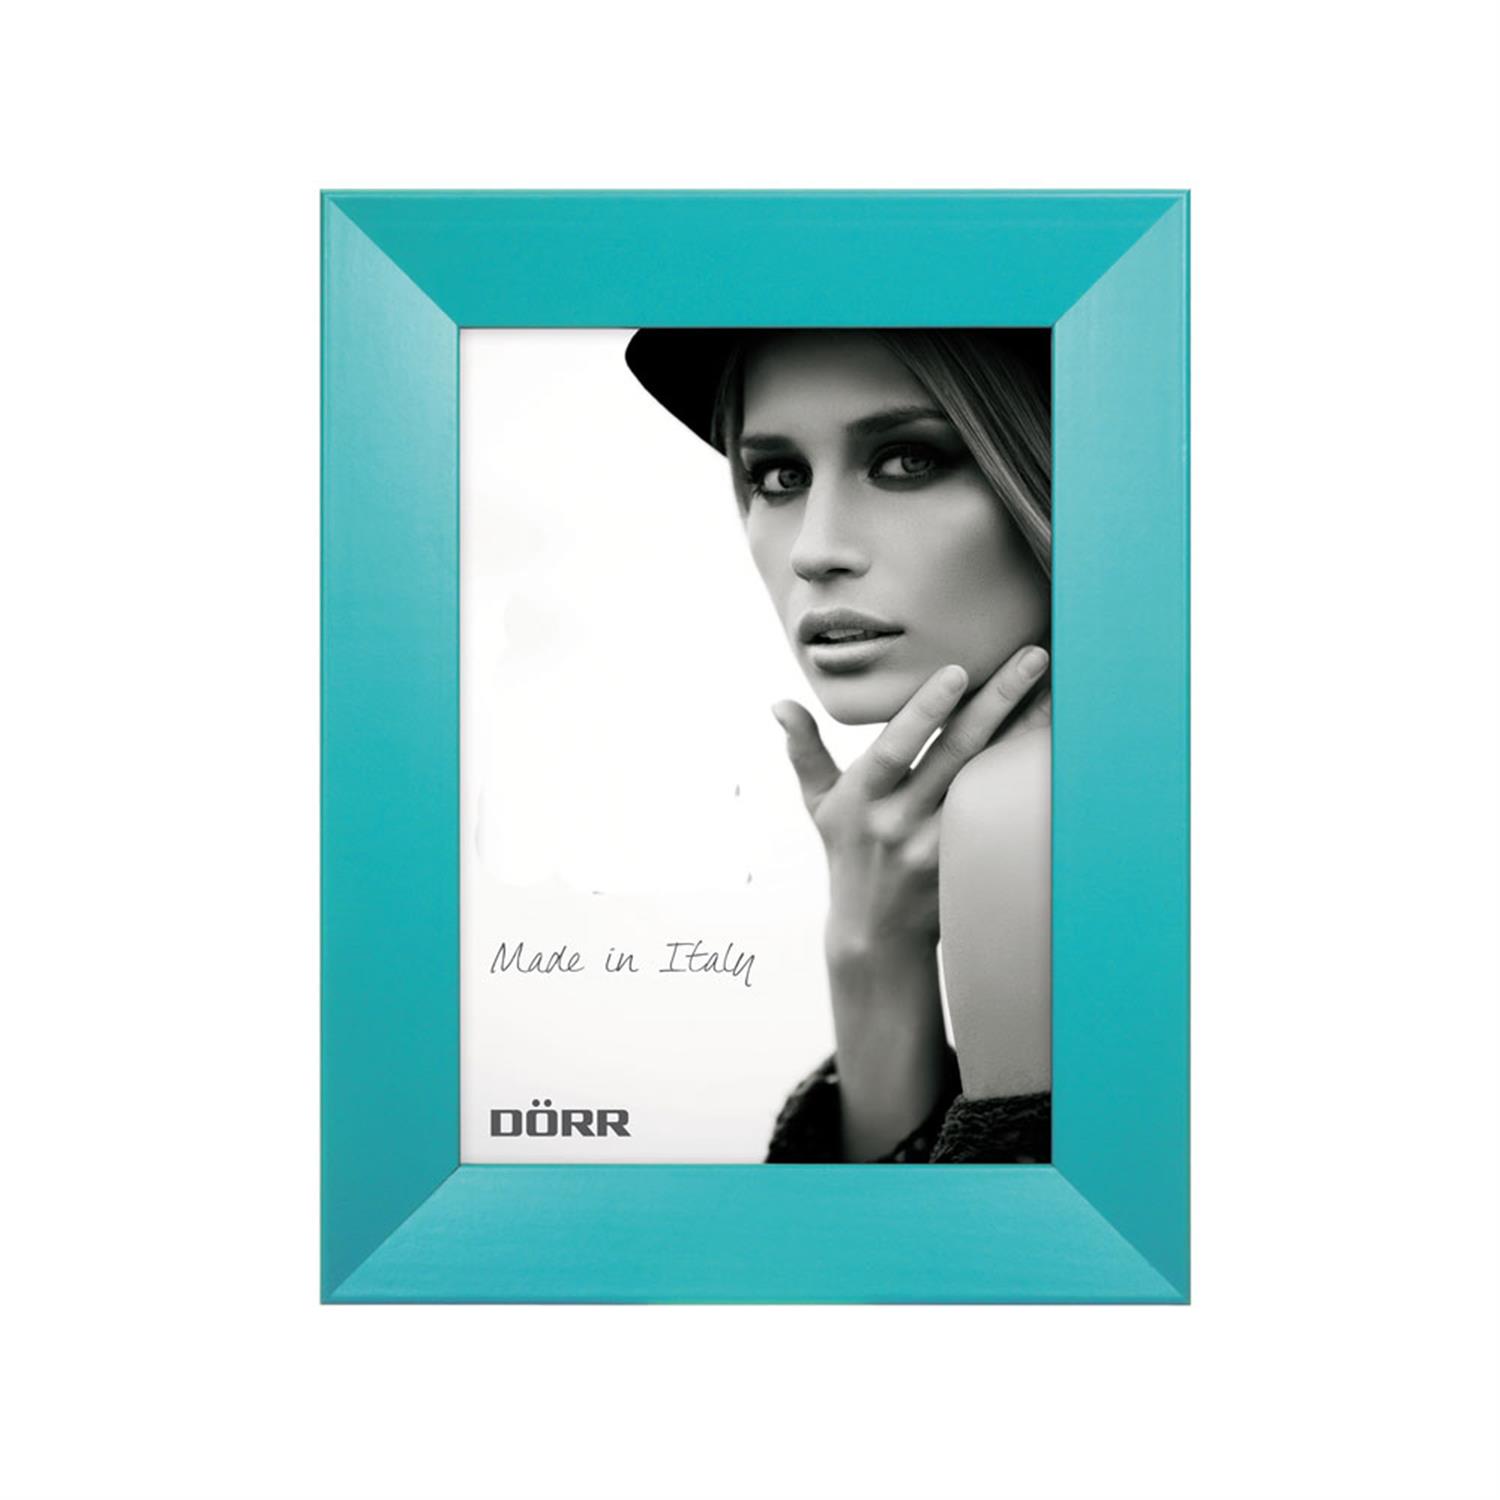 Dorr Trend Turquoise 7x5 inches Wood Photo Frame